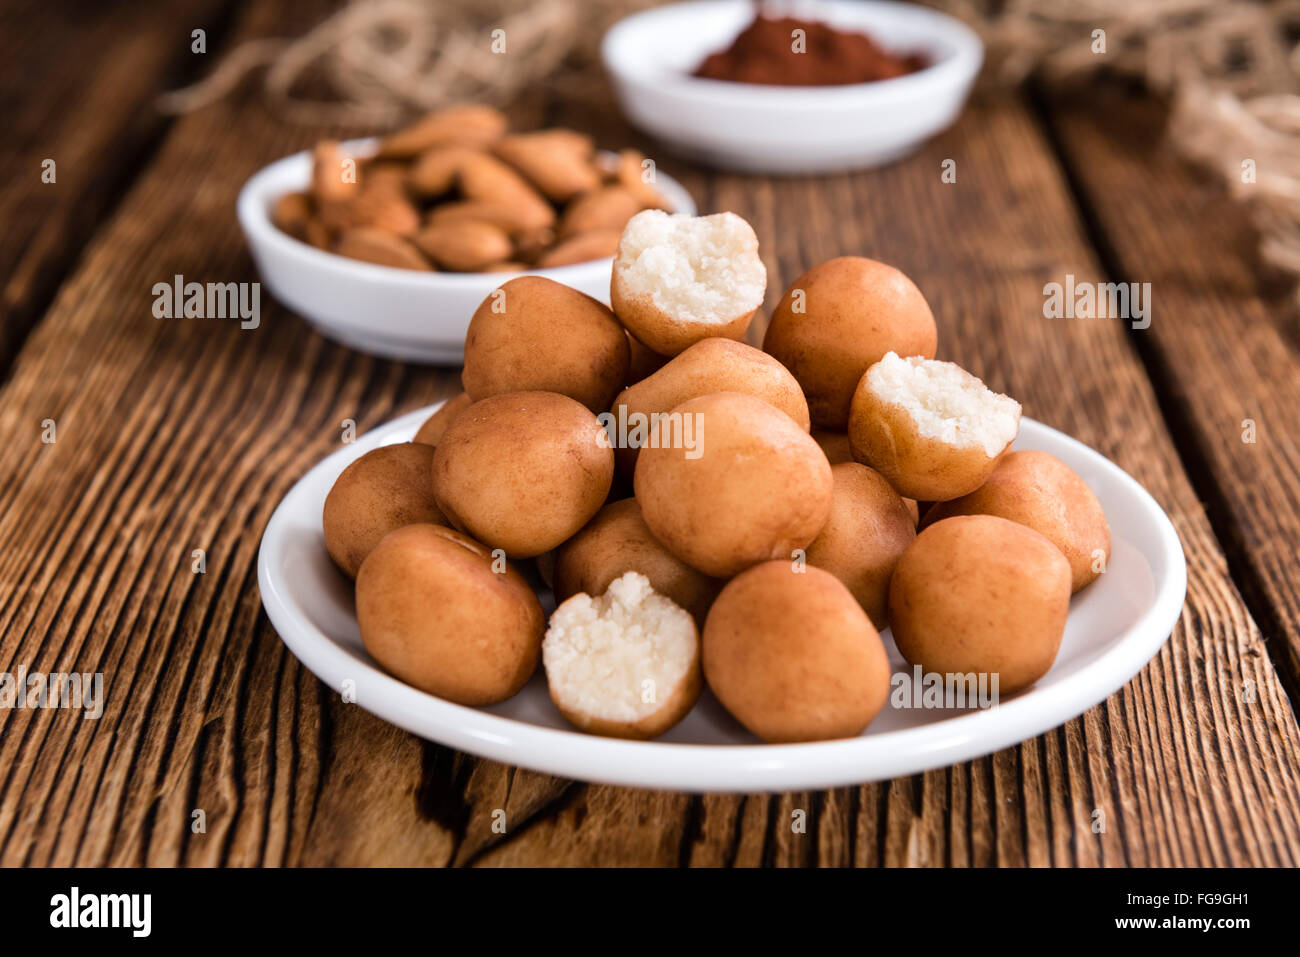 Homemade Marzipan Potatoes (German cuisine) on rustic wooden background Stock Photo